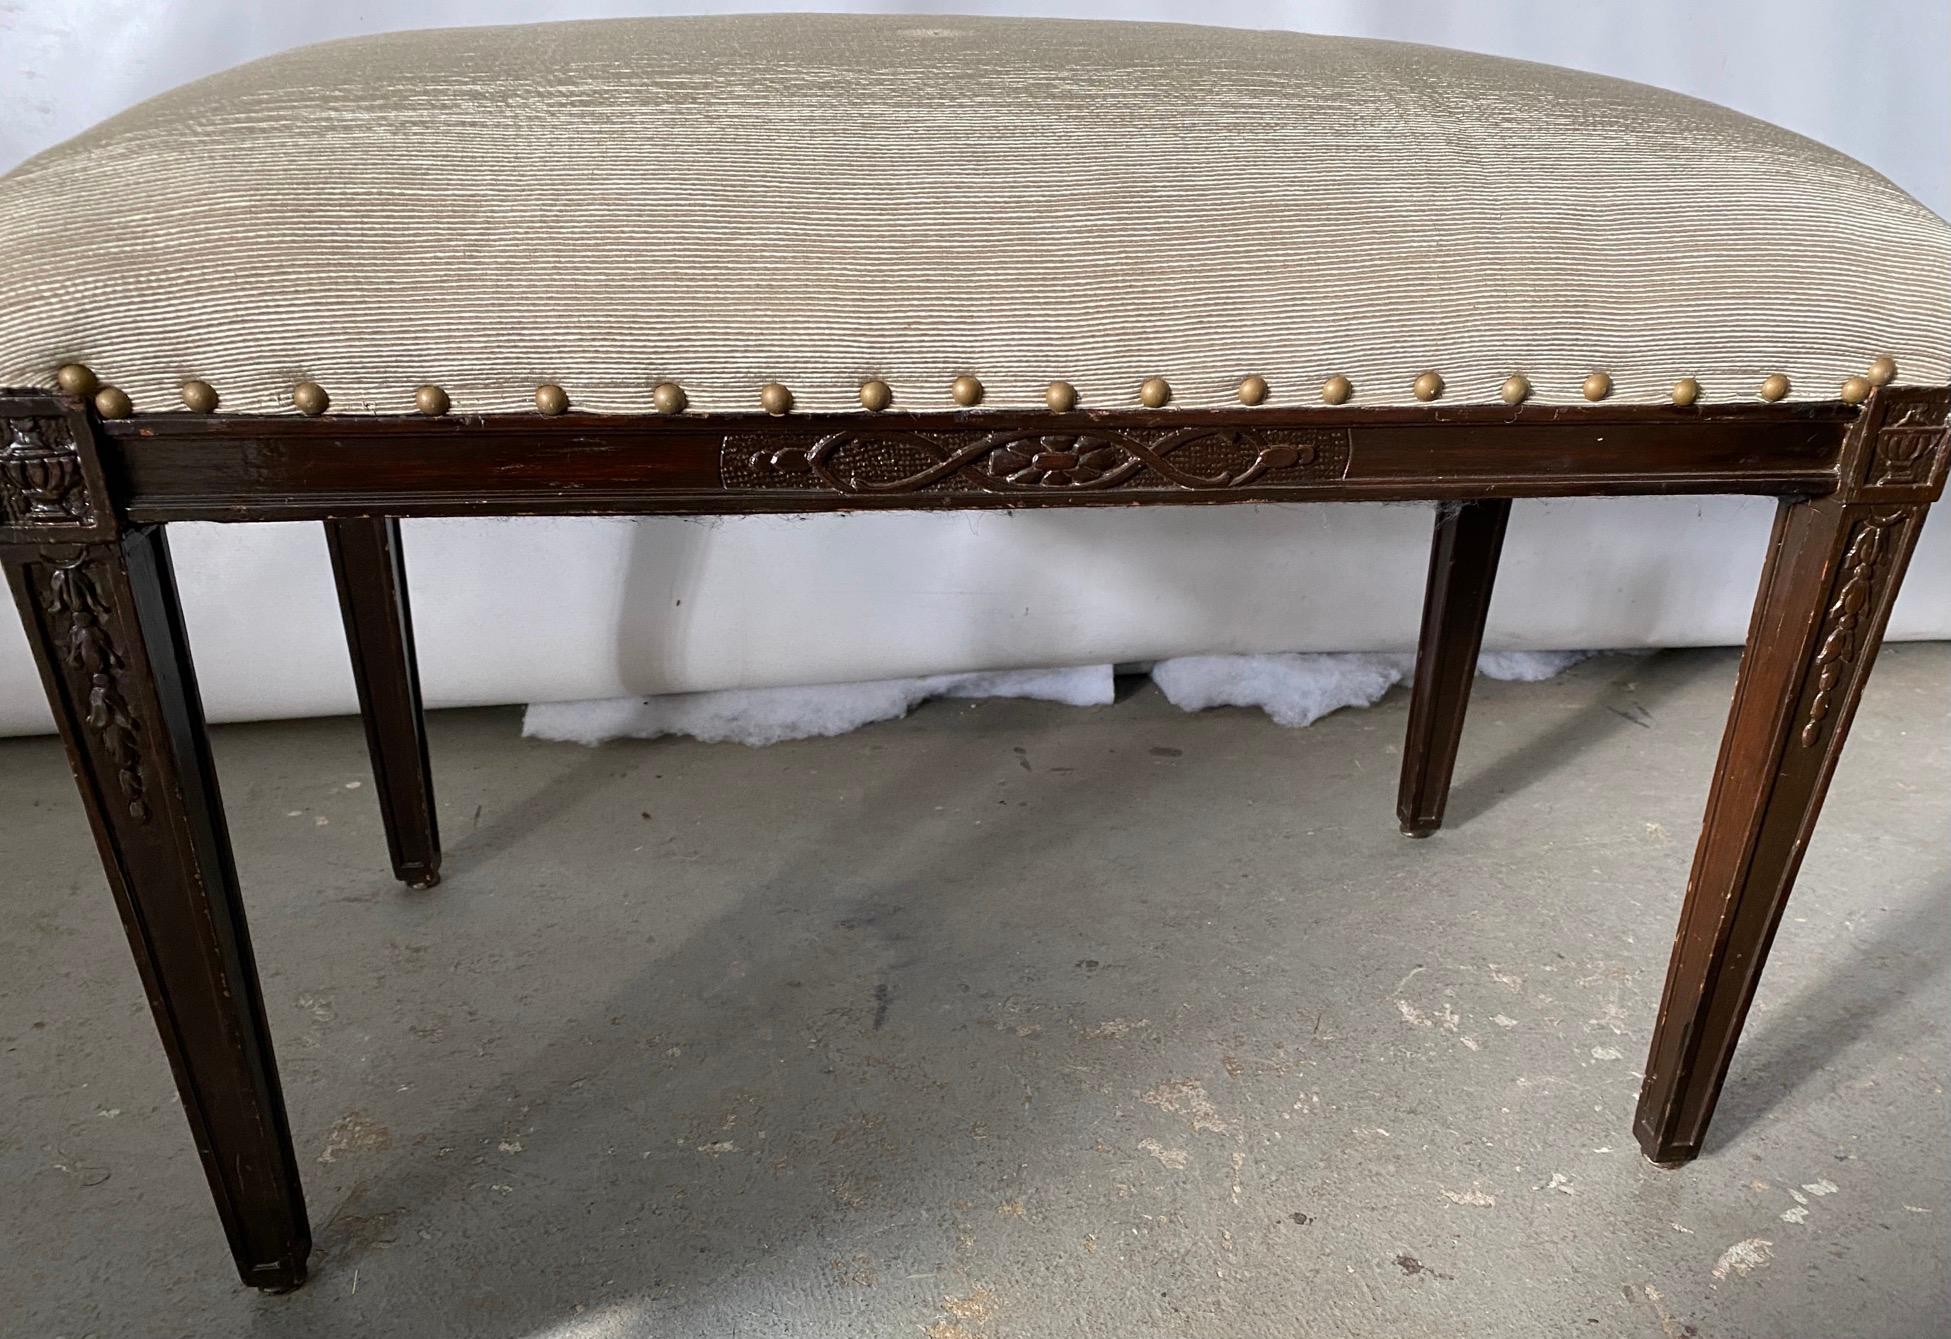 The upholstered bench can be used as a piano bench, vanity bench or extra seating when or wherever needed. Wonderful carved details giving it extra interest. Be it Sheraton, Regency, Hepplewhite or Hollywood Regency, this bench will be a wonderful